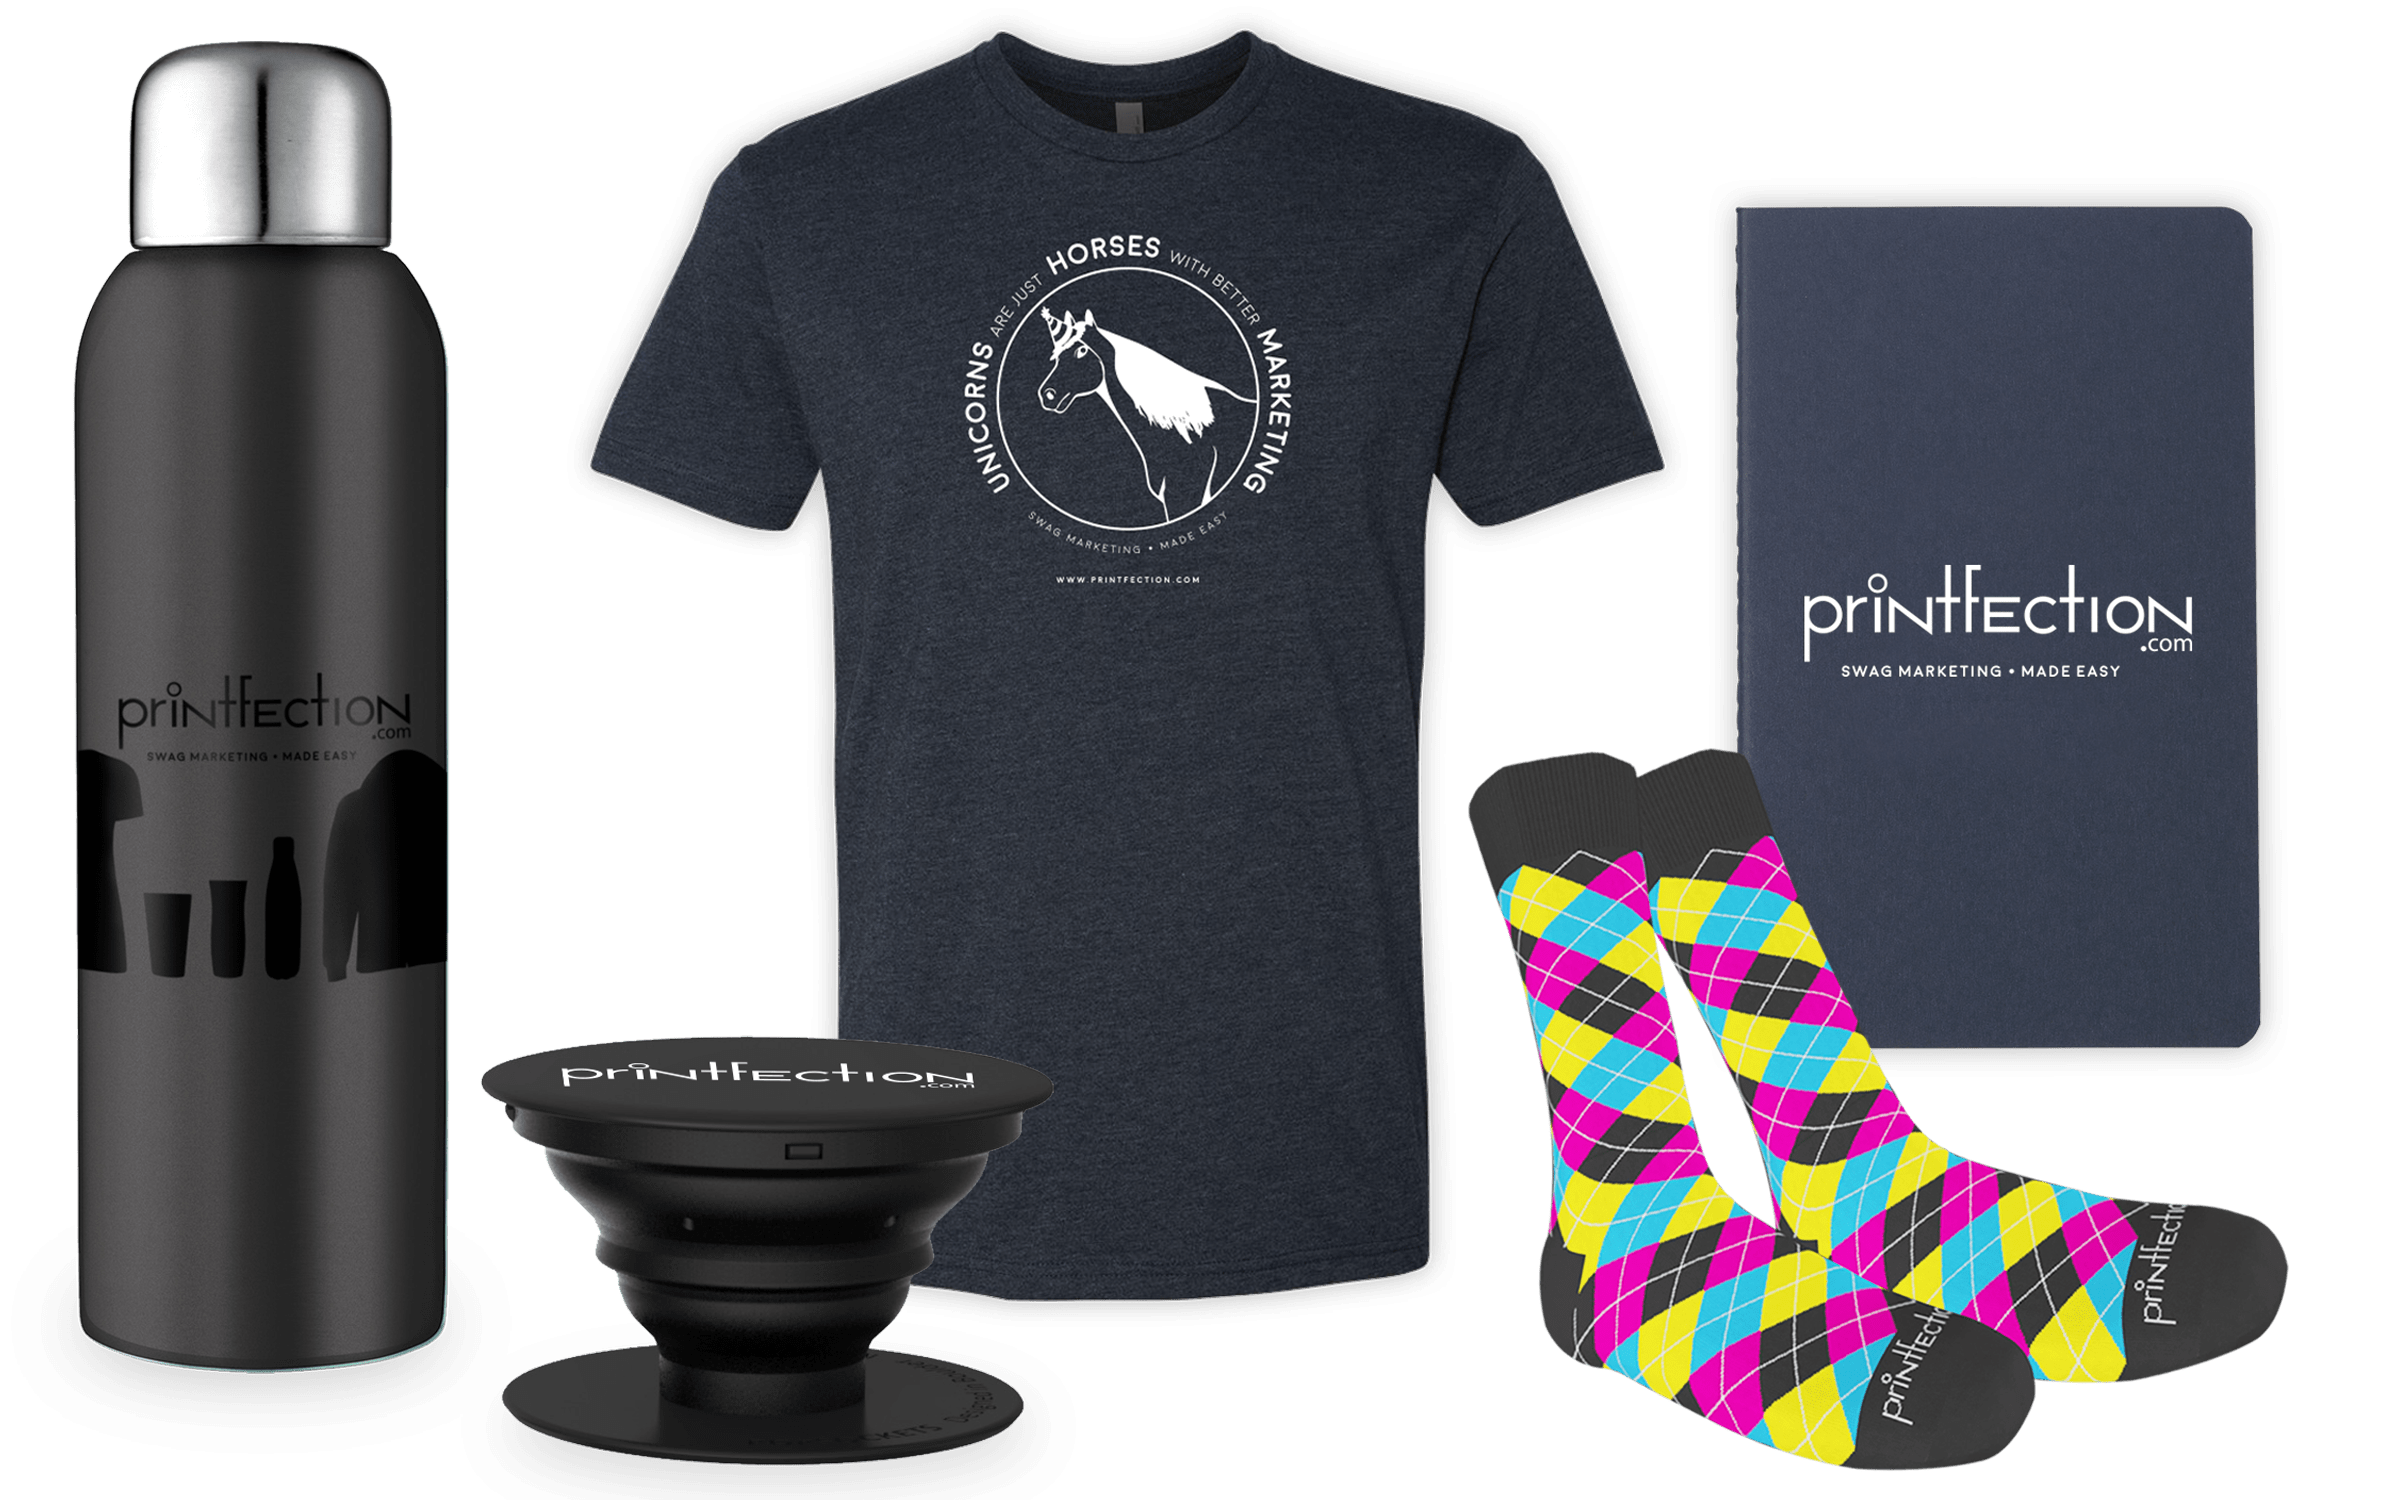 event swag under $10 - t-shirts, water bottles, socks, notebooks